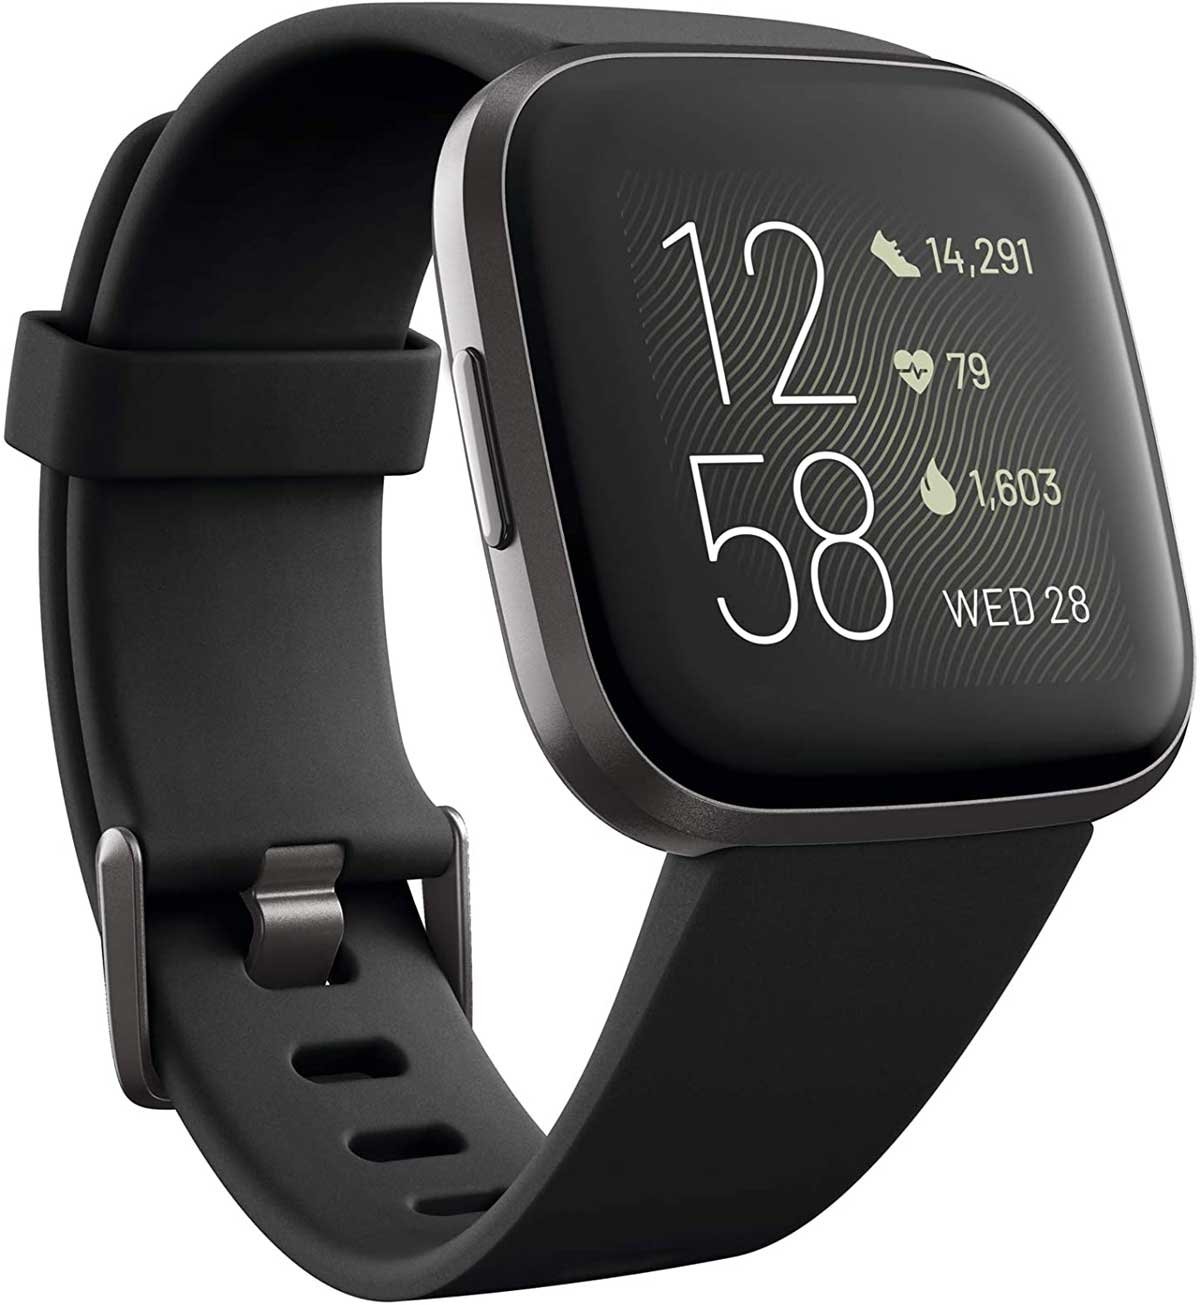 which fitbit can detect afib